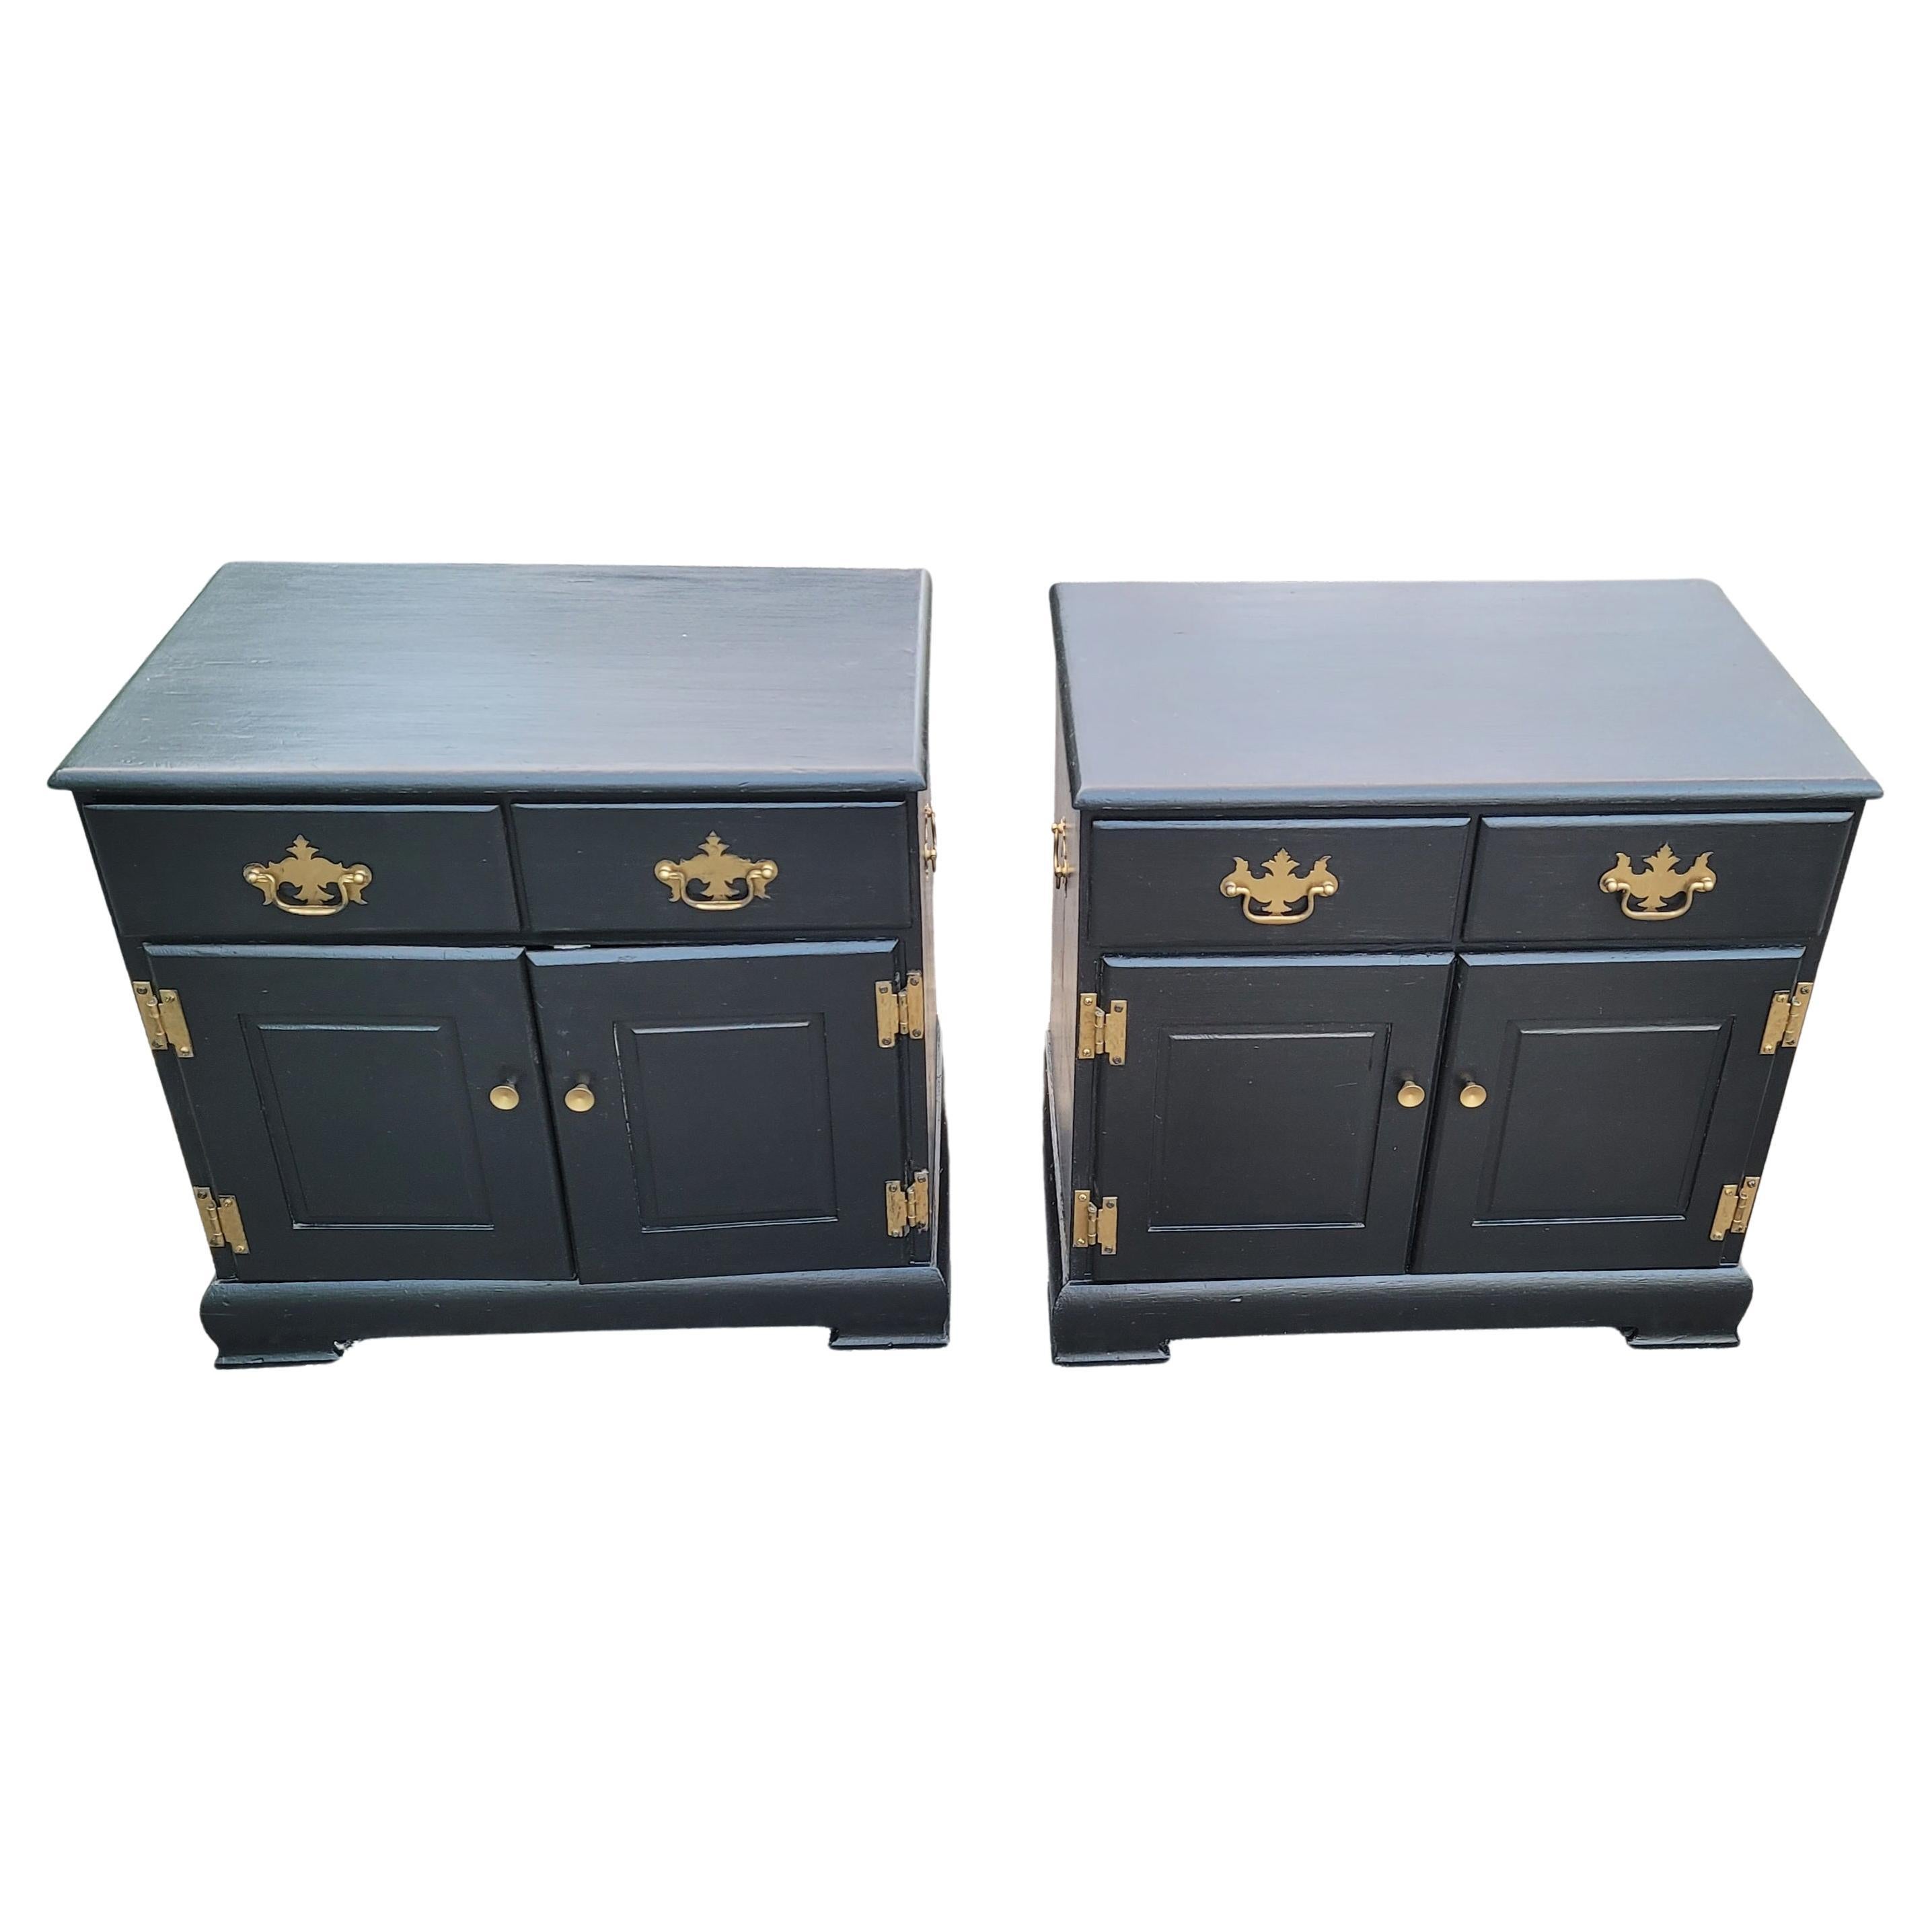 A gorgeous pair of Ebonized French Chippendale side cabinets or nightstands in solid pine in very good vintage condition. Newly ebonized with new solid brass chippendale hardware. Old, Very light weight solid pine wood. Measures 24.25